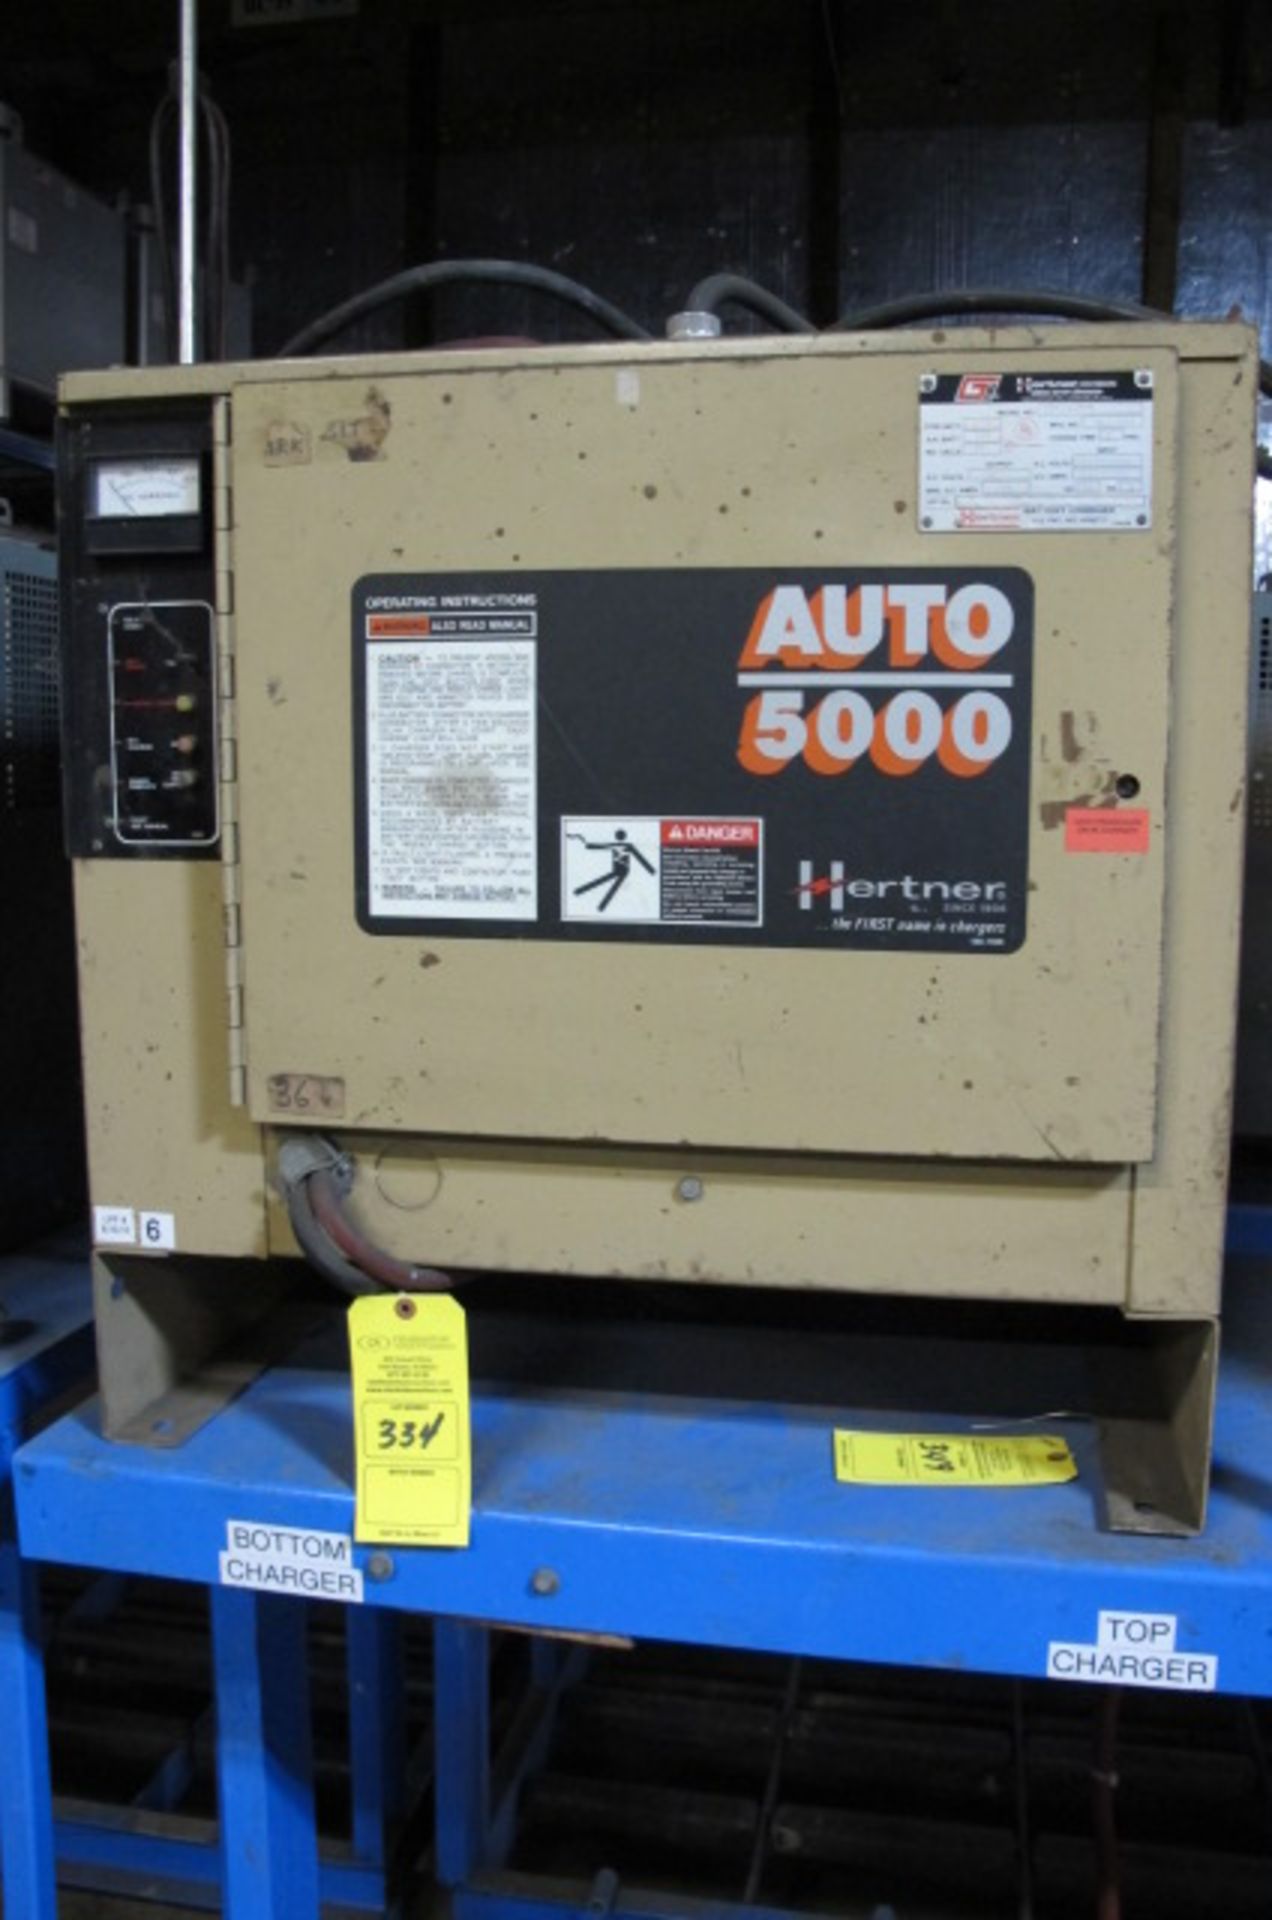 HERTNER 36V BATTERY CHARGER AUTO 501 7682 OH 120, Lyons, Ohio 43523 - all Gaylord plastic pallets